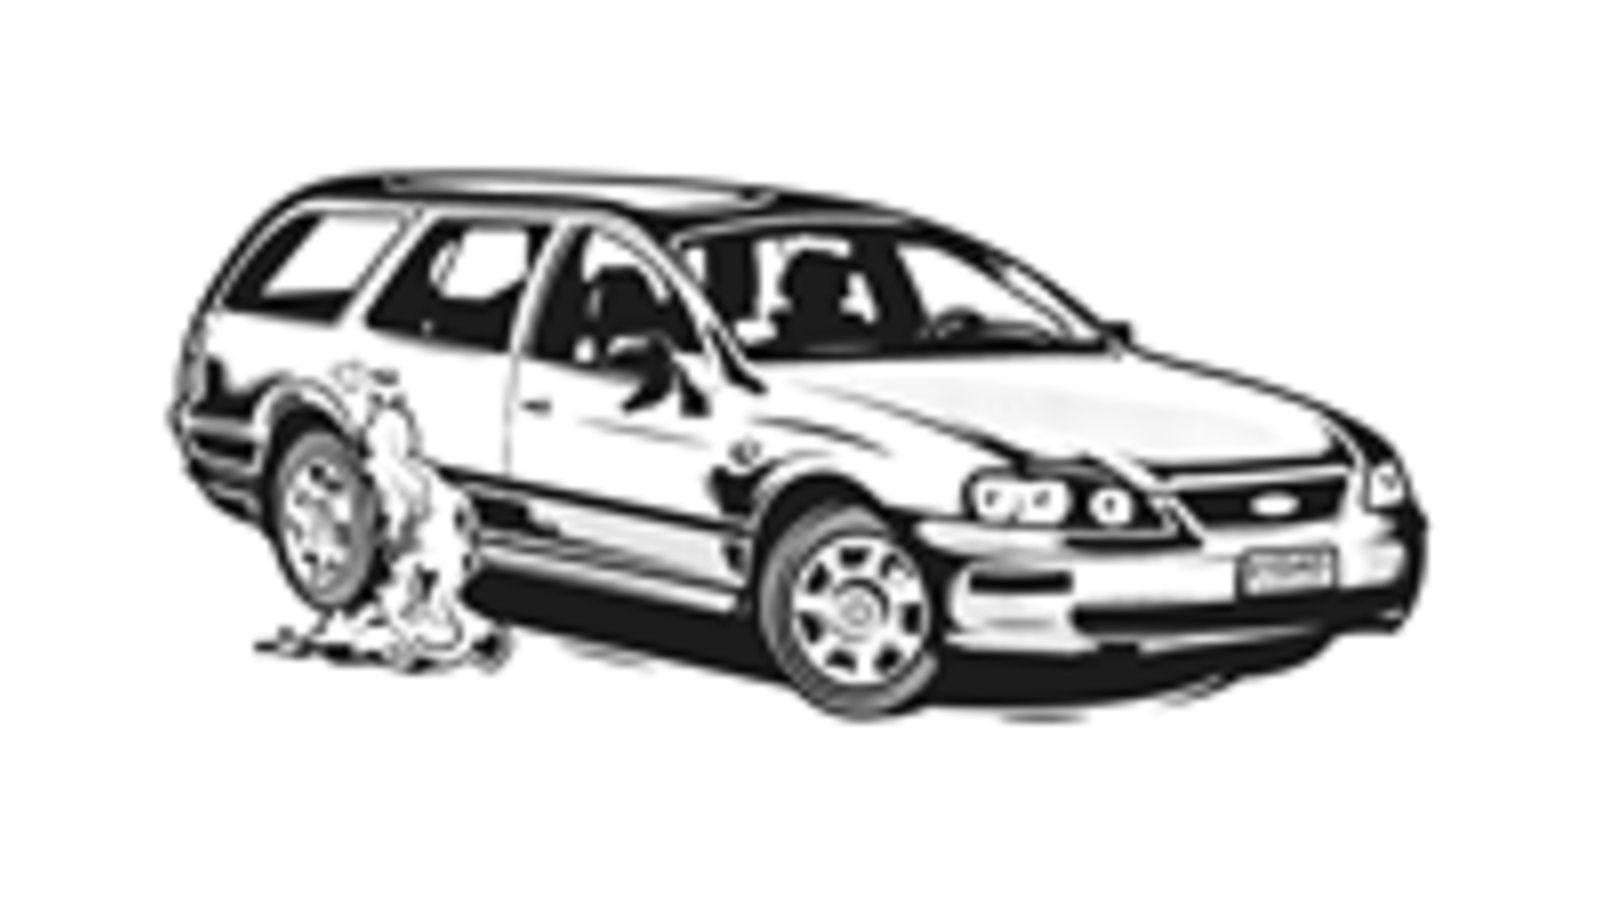 Illustration for article titled Low income, single dad cars